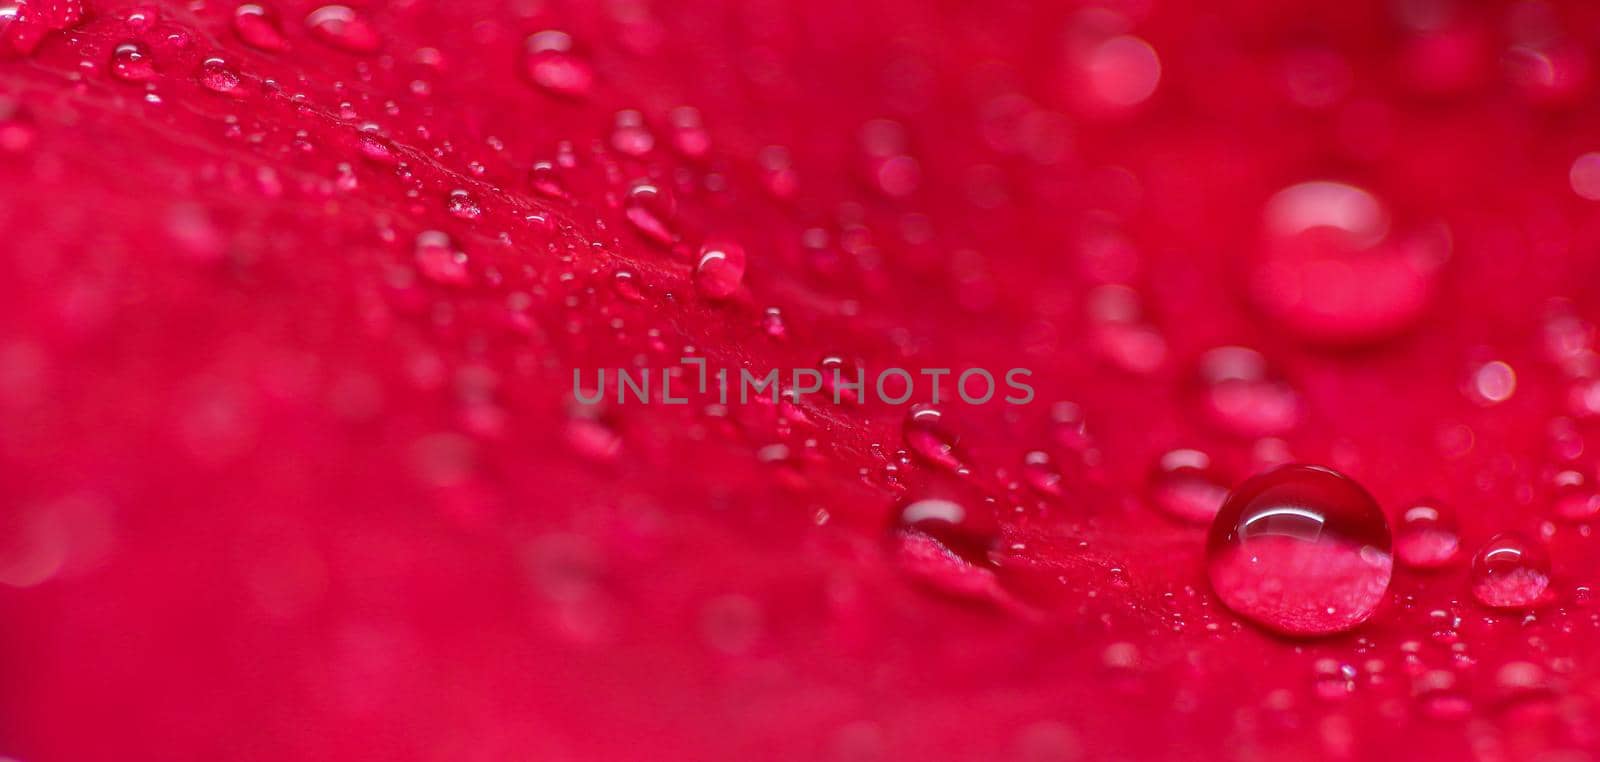 Background of red rose petals with dew drops. Bokeh with light reflection. Macro blurred natural backdrop. Soft focus